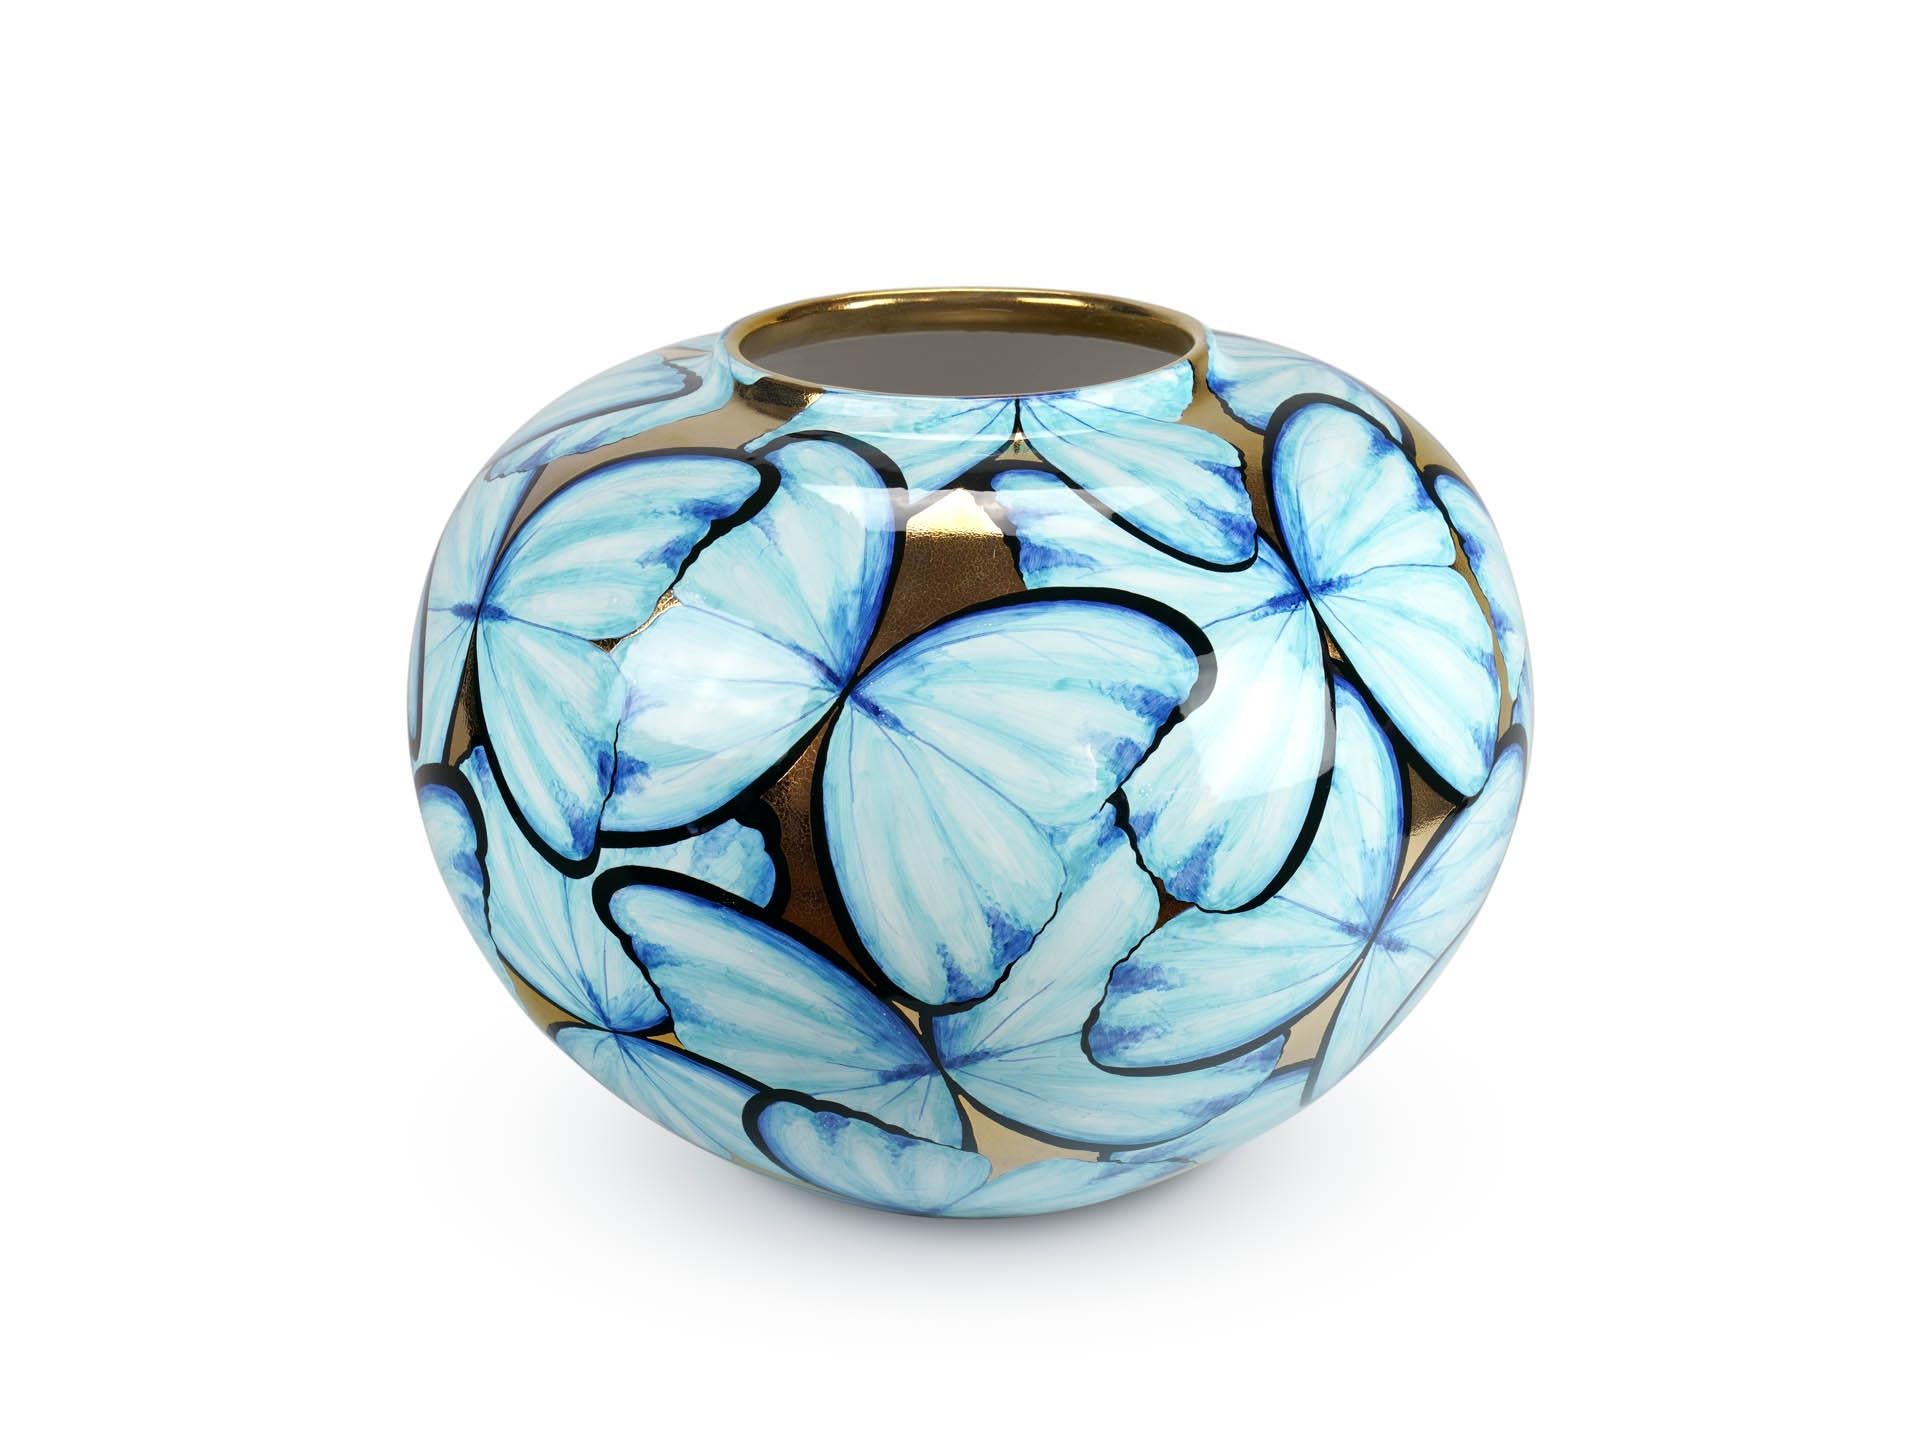 Large Ceramic Vase Hand-Painted Light Blue Butterflies, 24kt Gold Luster, Italy  For Sale 8